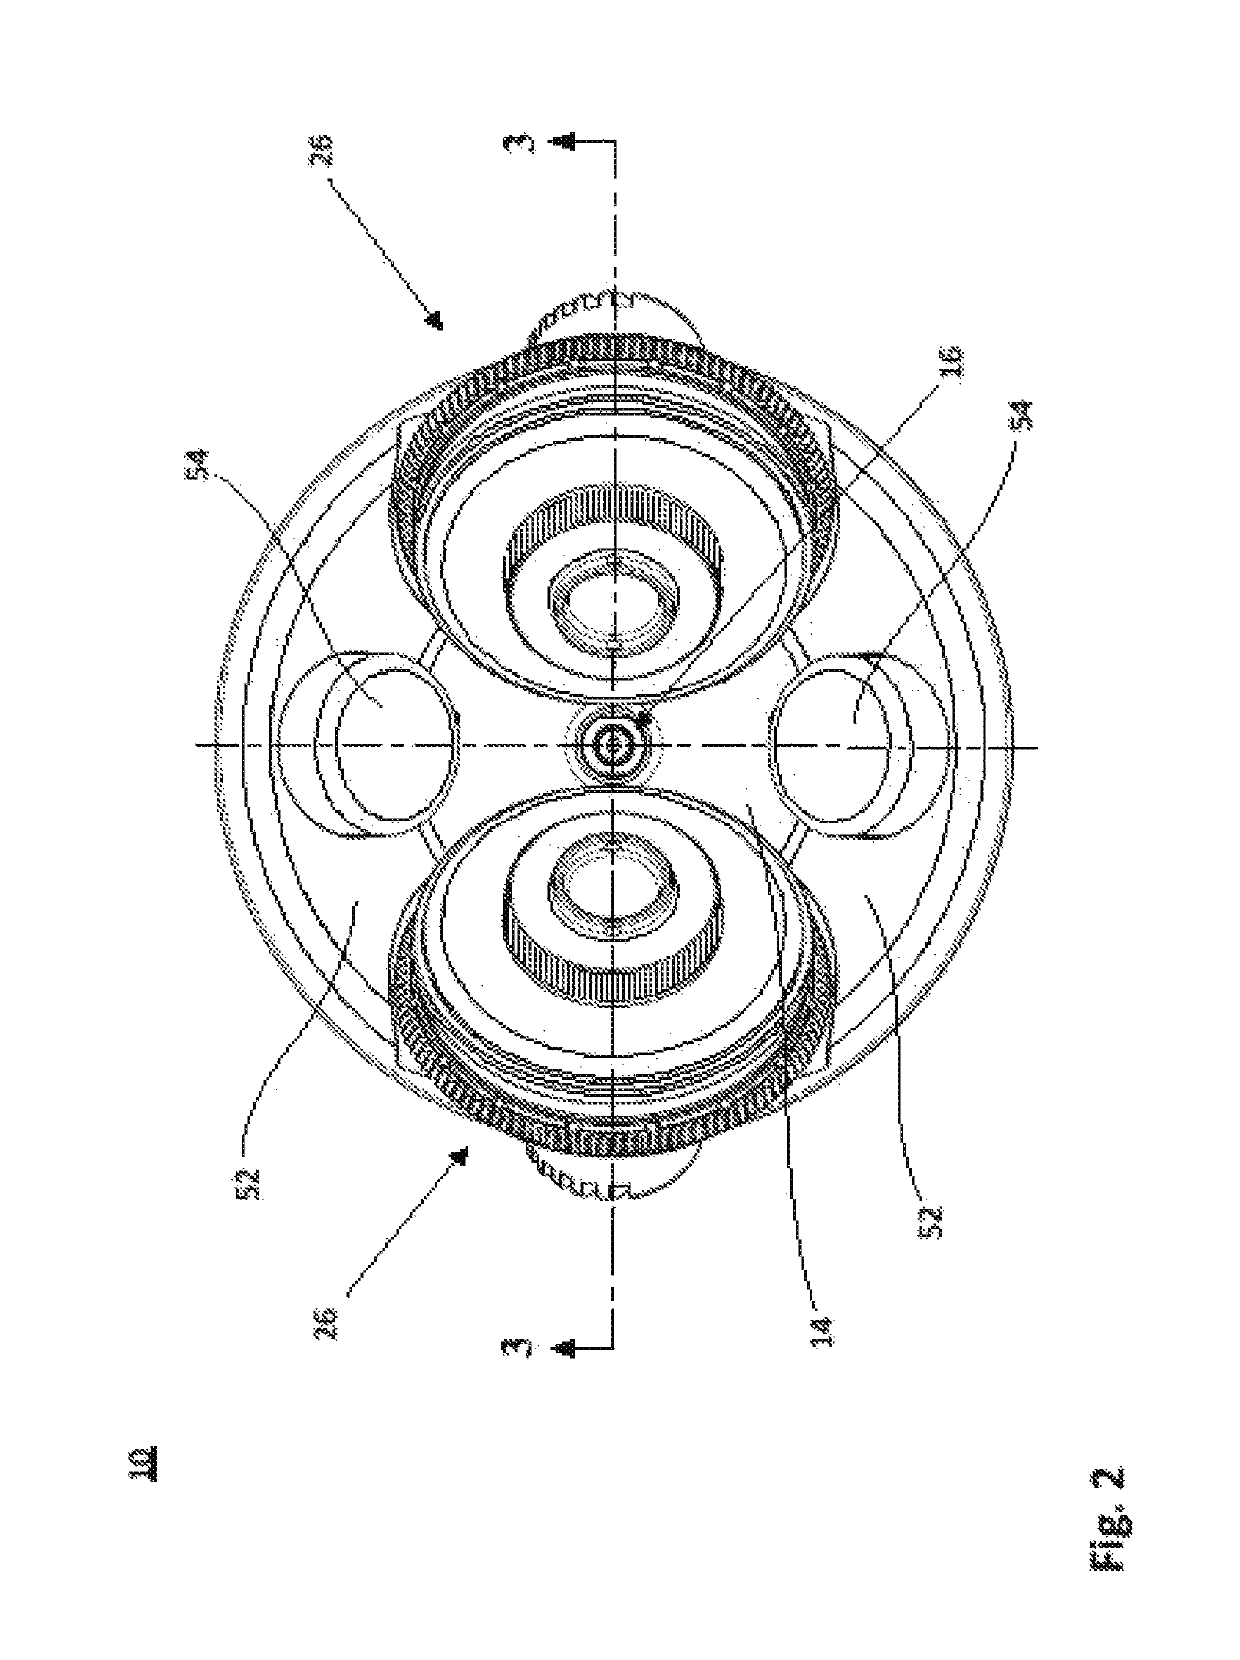 Dual centrifuge rotor with damping mass